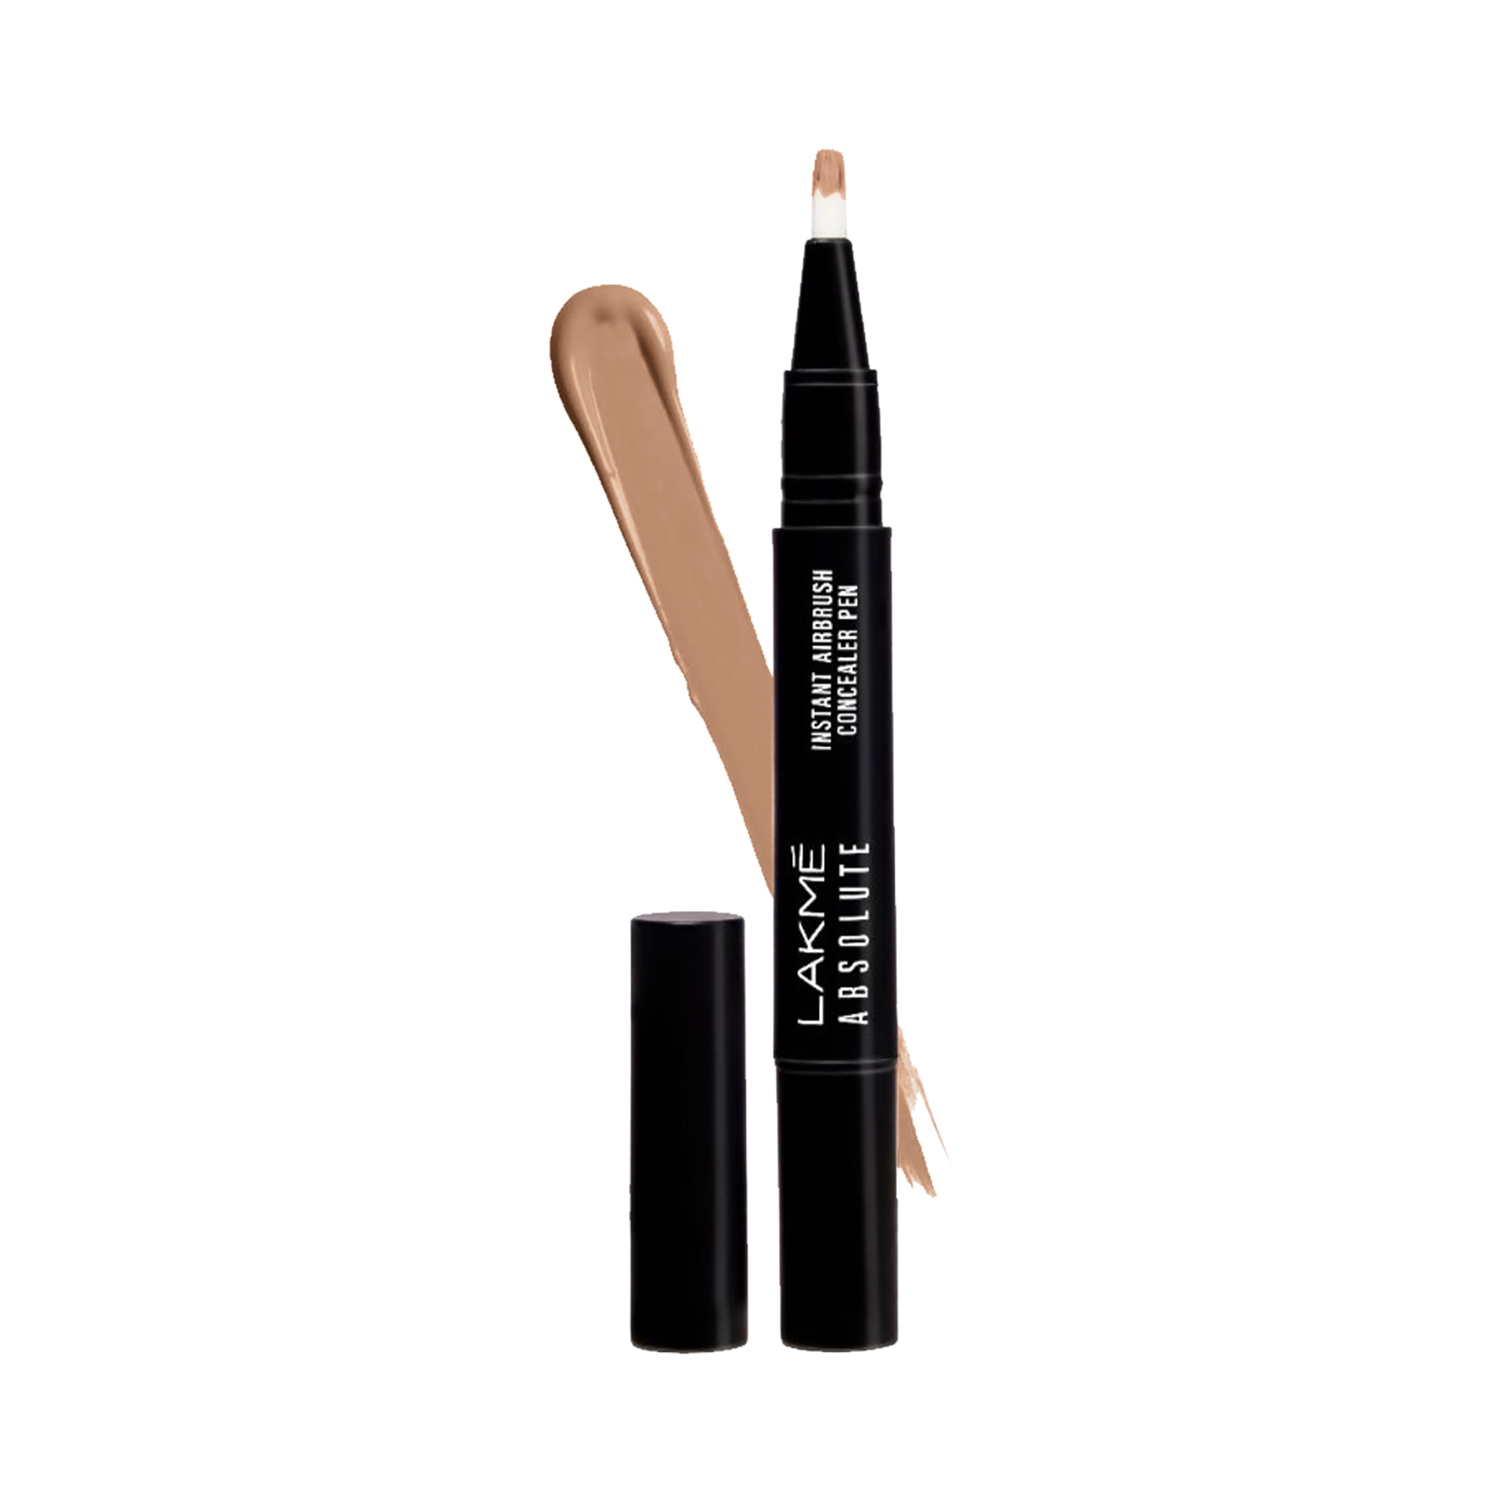 Lakme | Lakme Absolute Instant Airbrush Concealer Pen - Beige (1.8g)